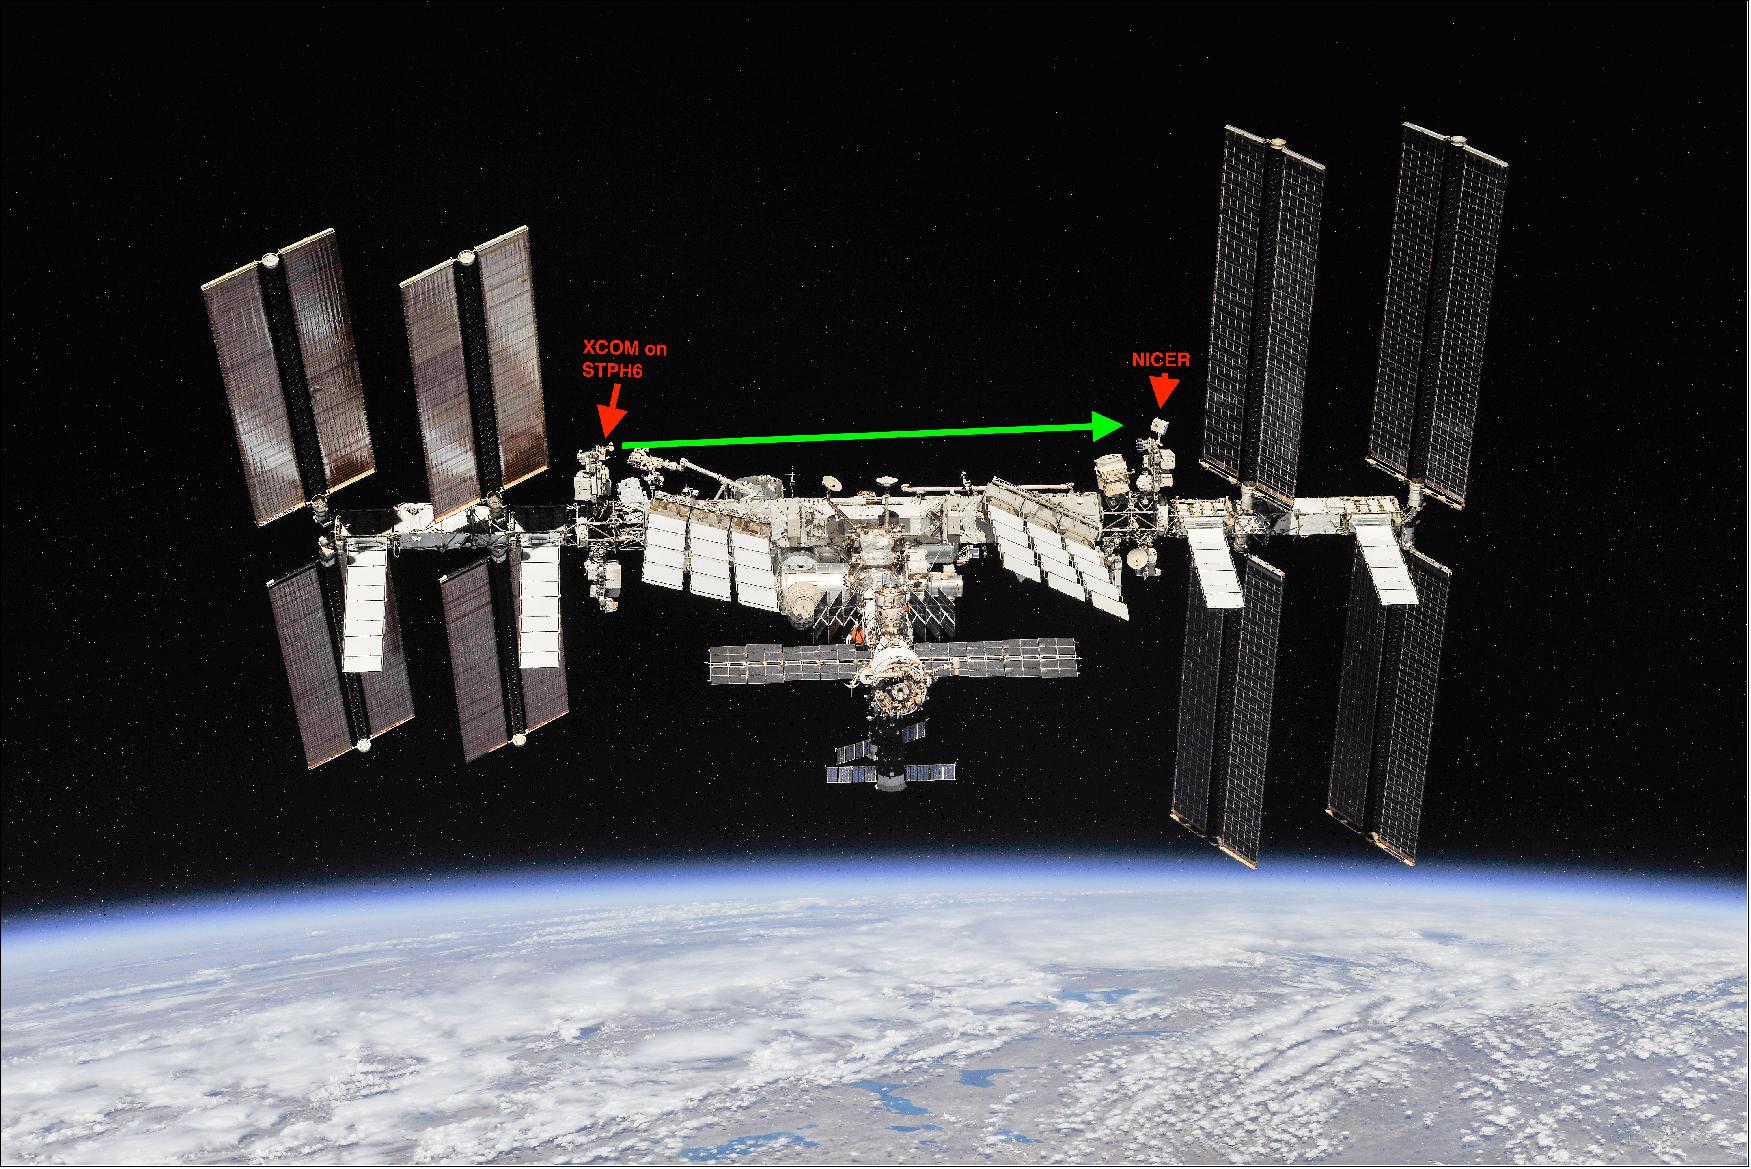 Figure 23: NASA's first-ever demonstration of X-ray communication will occur on the International Space Station. This image shows the locations of the Modulated X-ray Source and the NICER (Neutron star Interior Composition Explorer), which are critical to the demonstration (image credit: NASA)